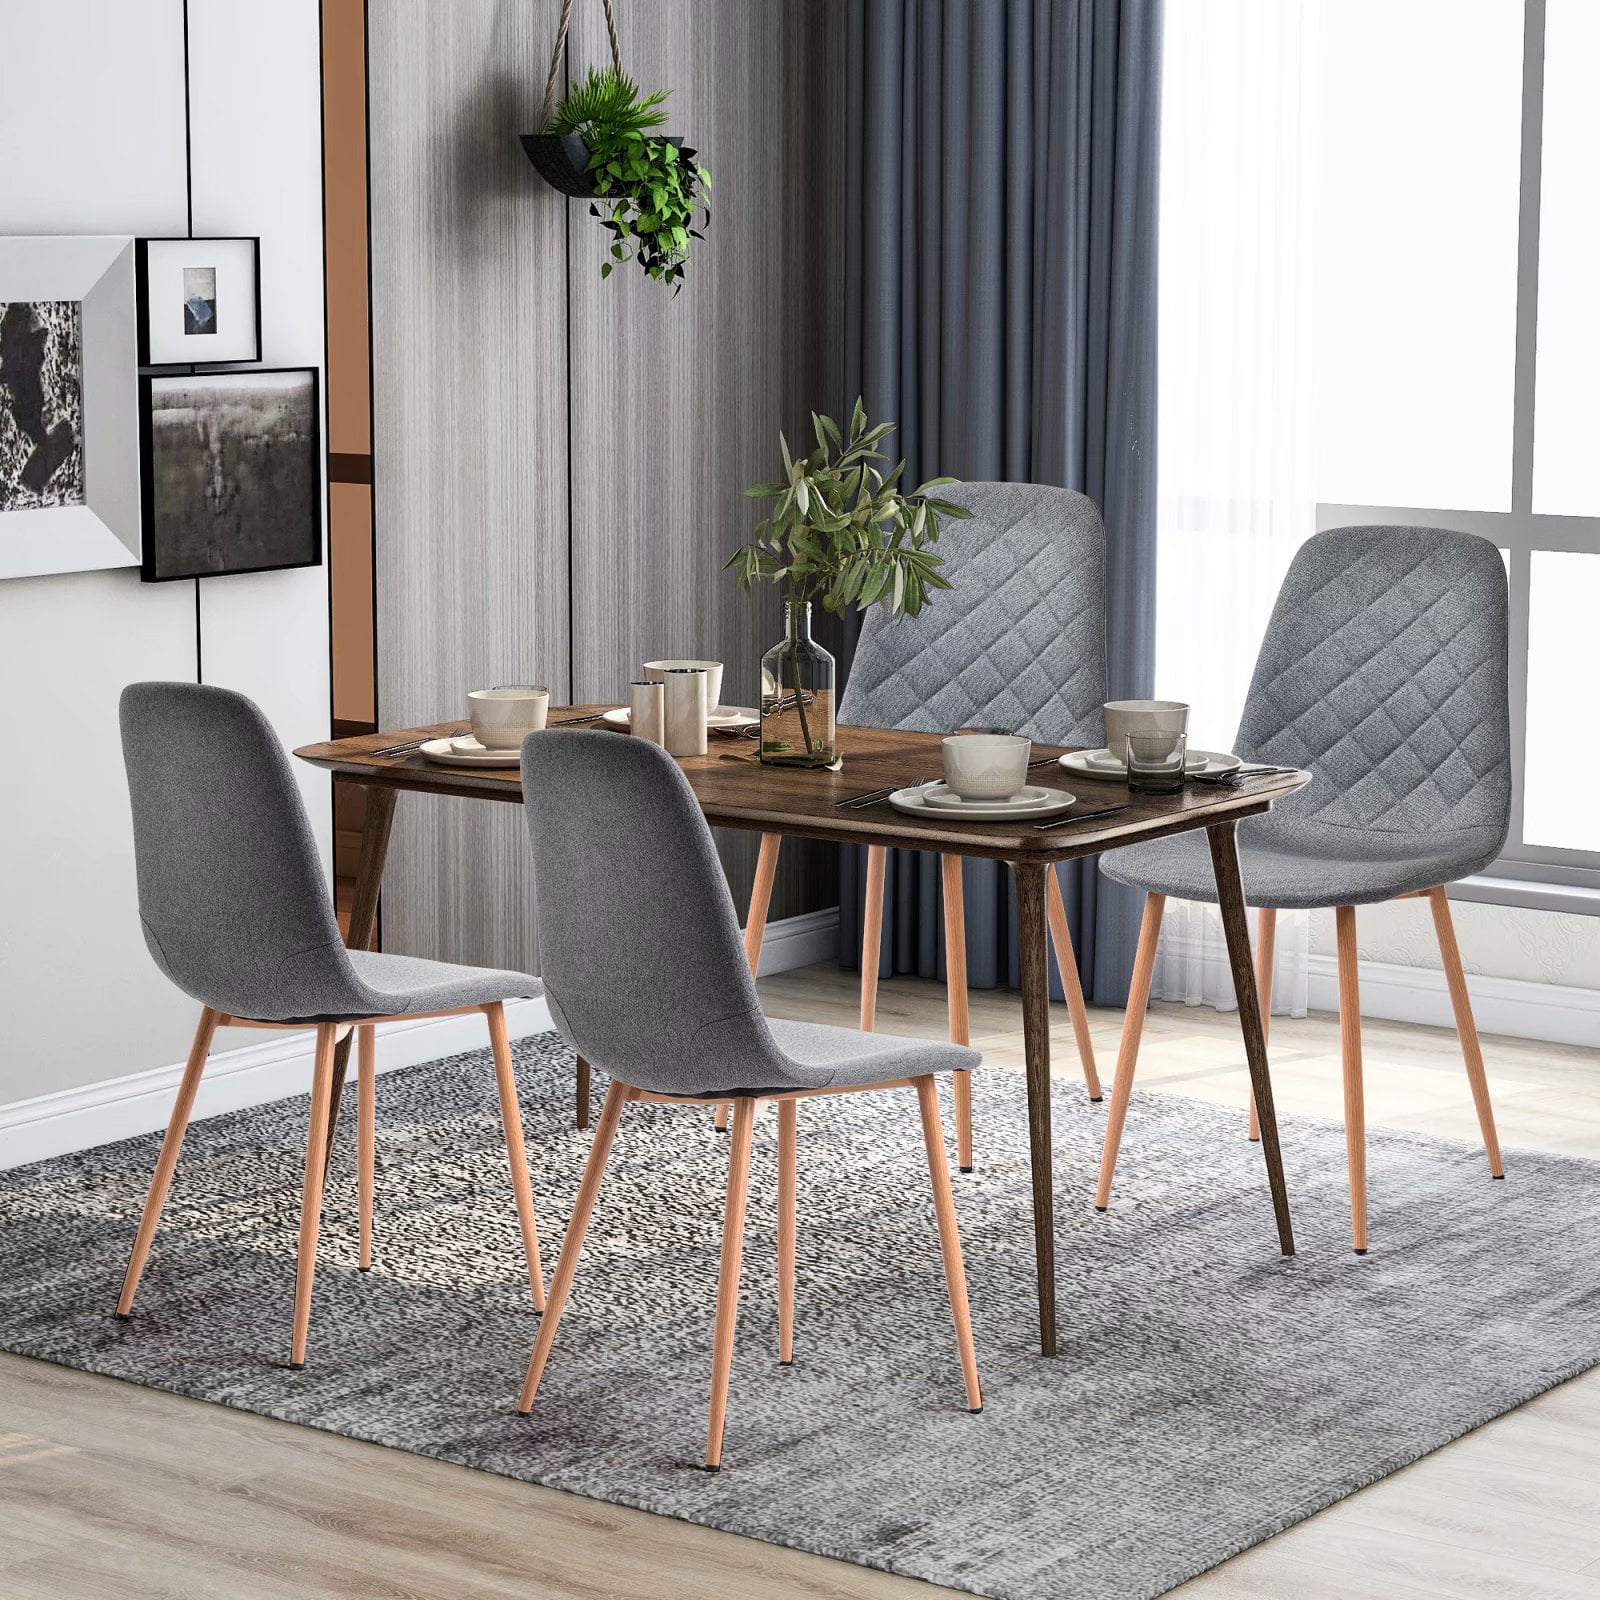 Piscis Dining Chairs Set of 4, Vintage PU Leather Upholstered Side ...